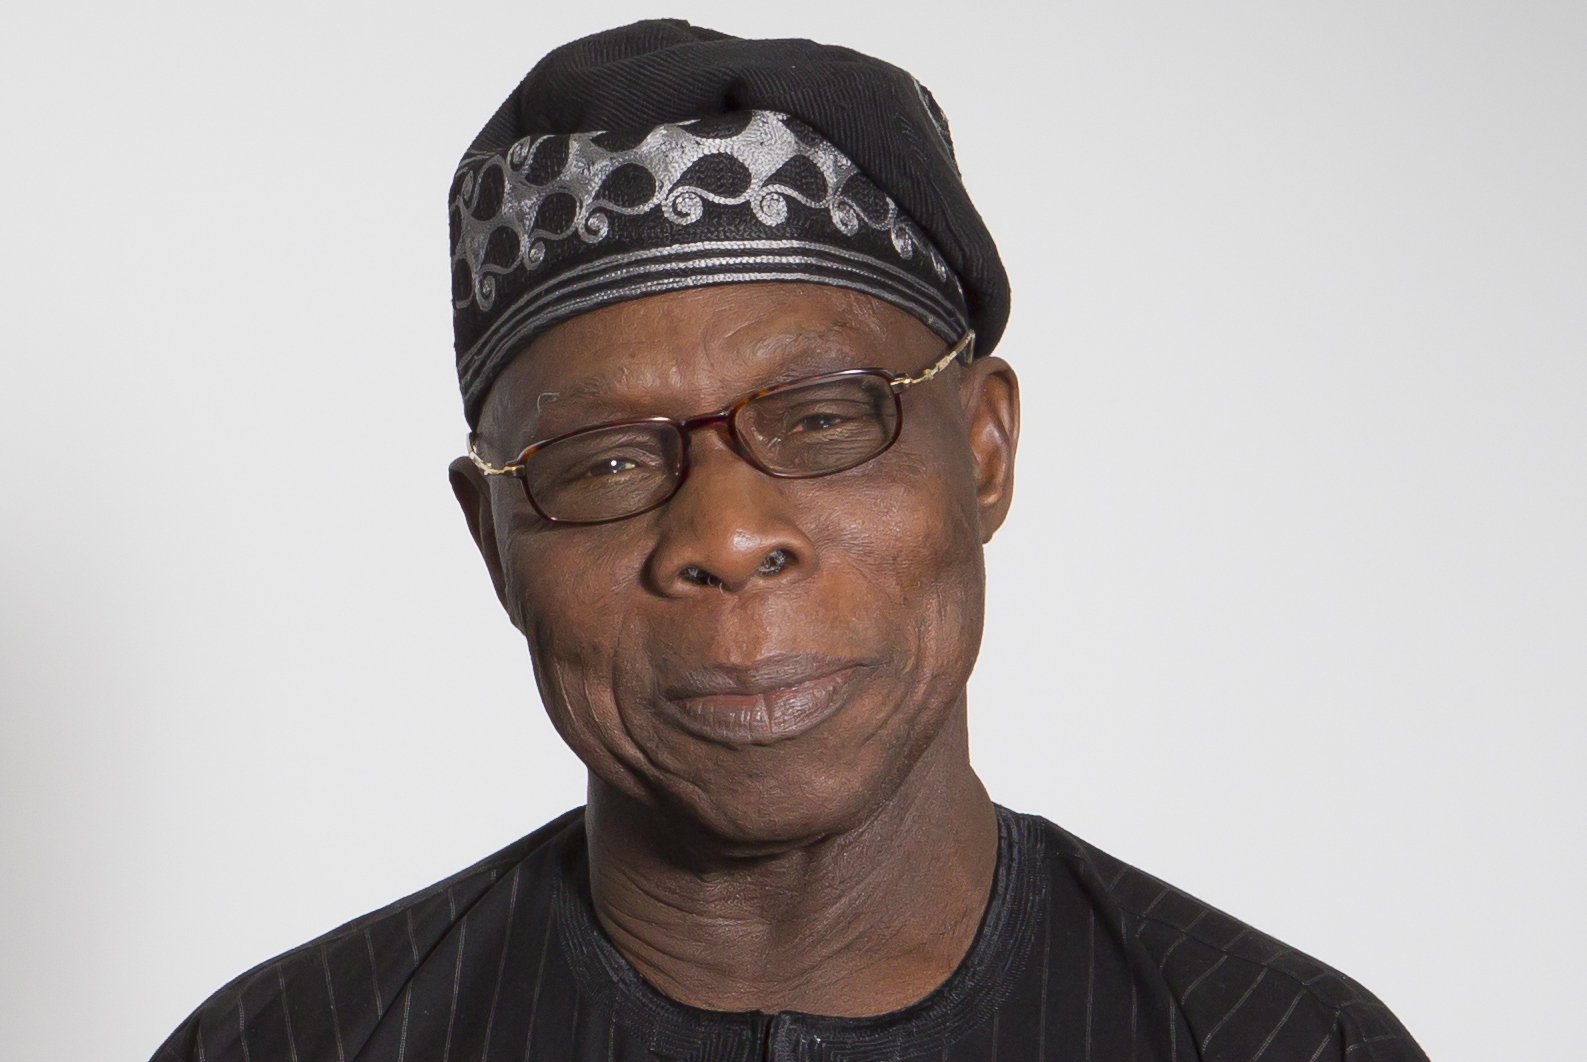 ‘Africa will decide its energy future’ – Obasanjo